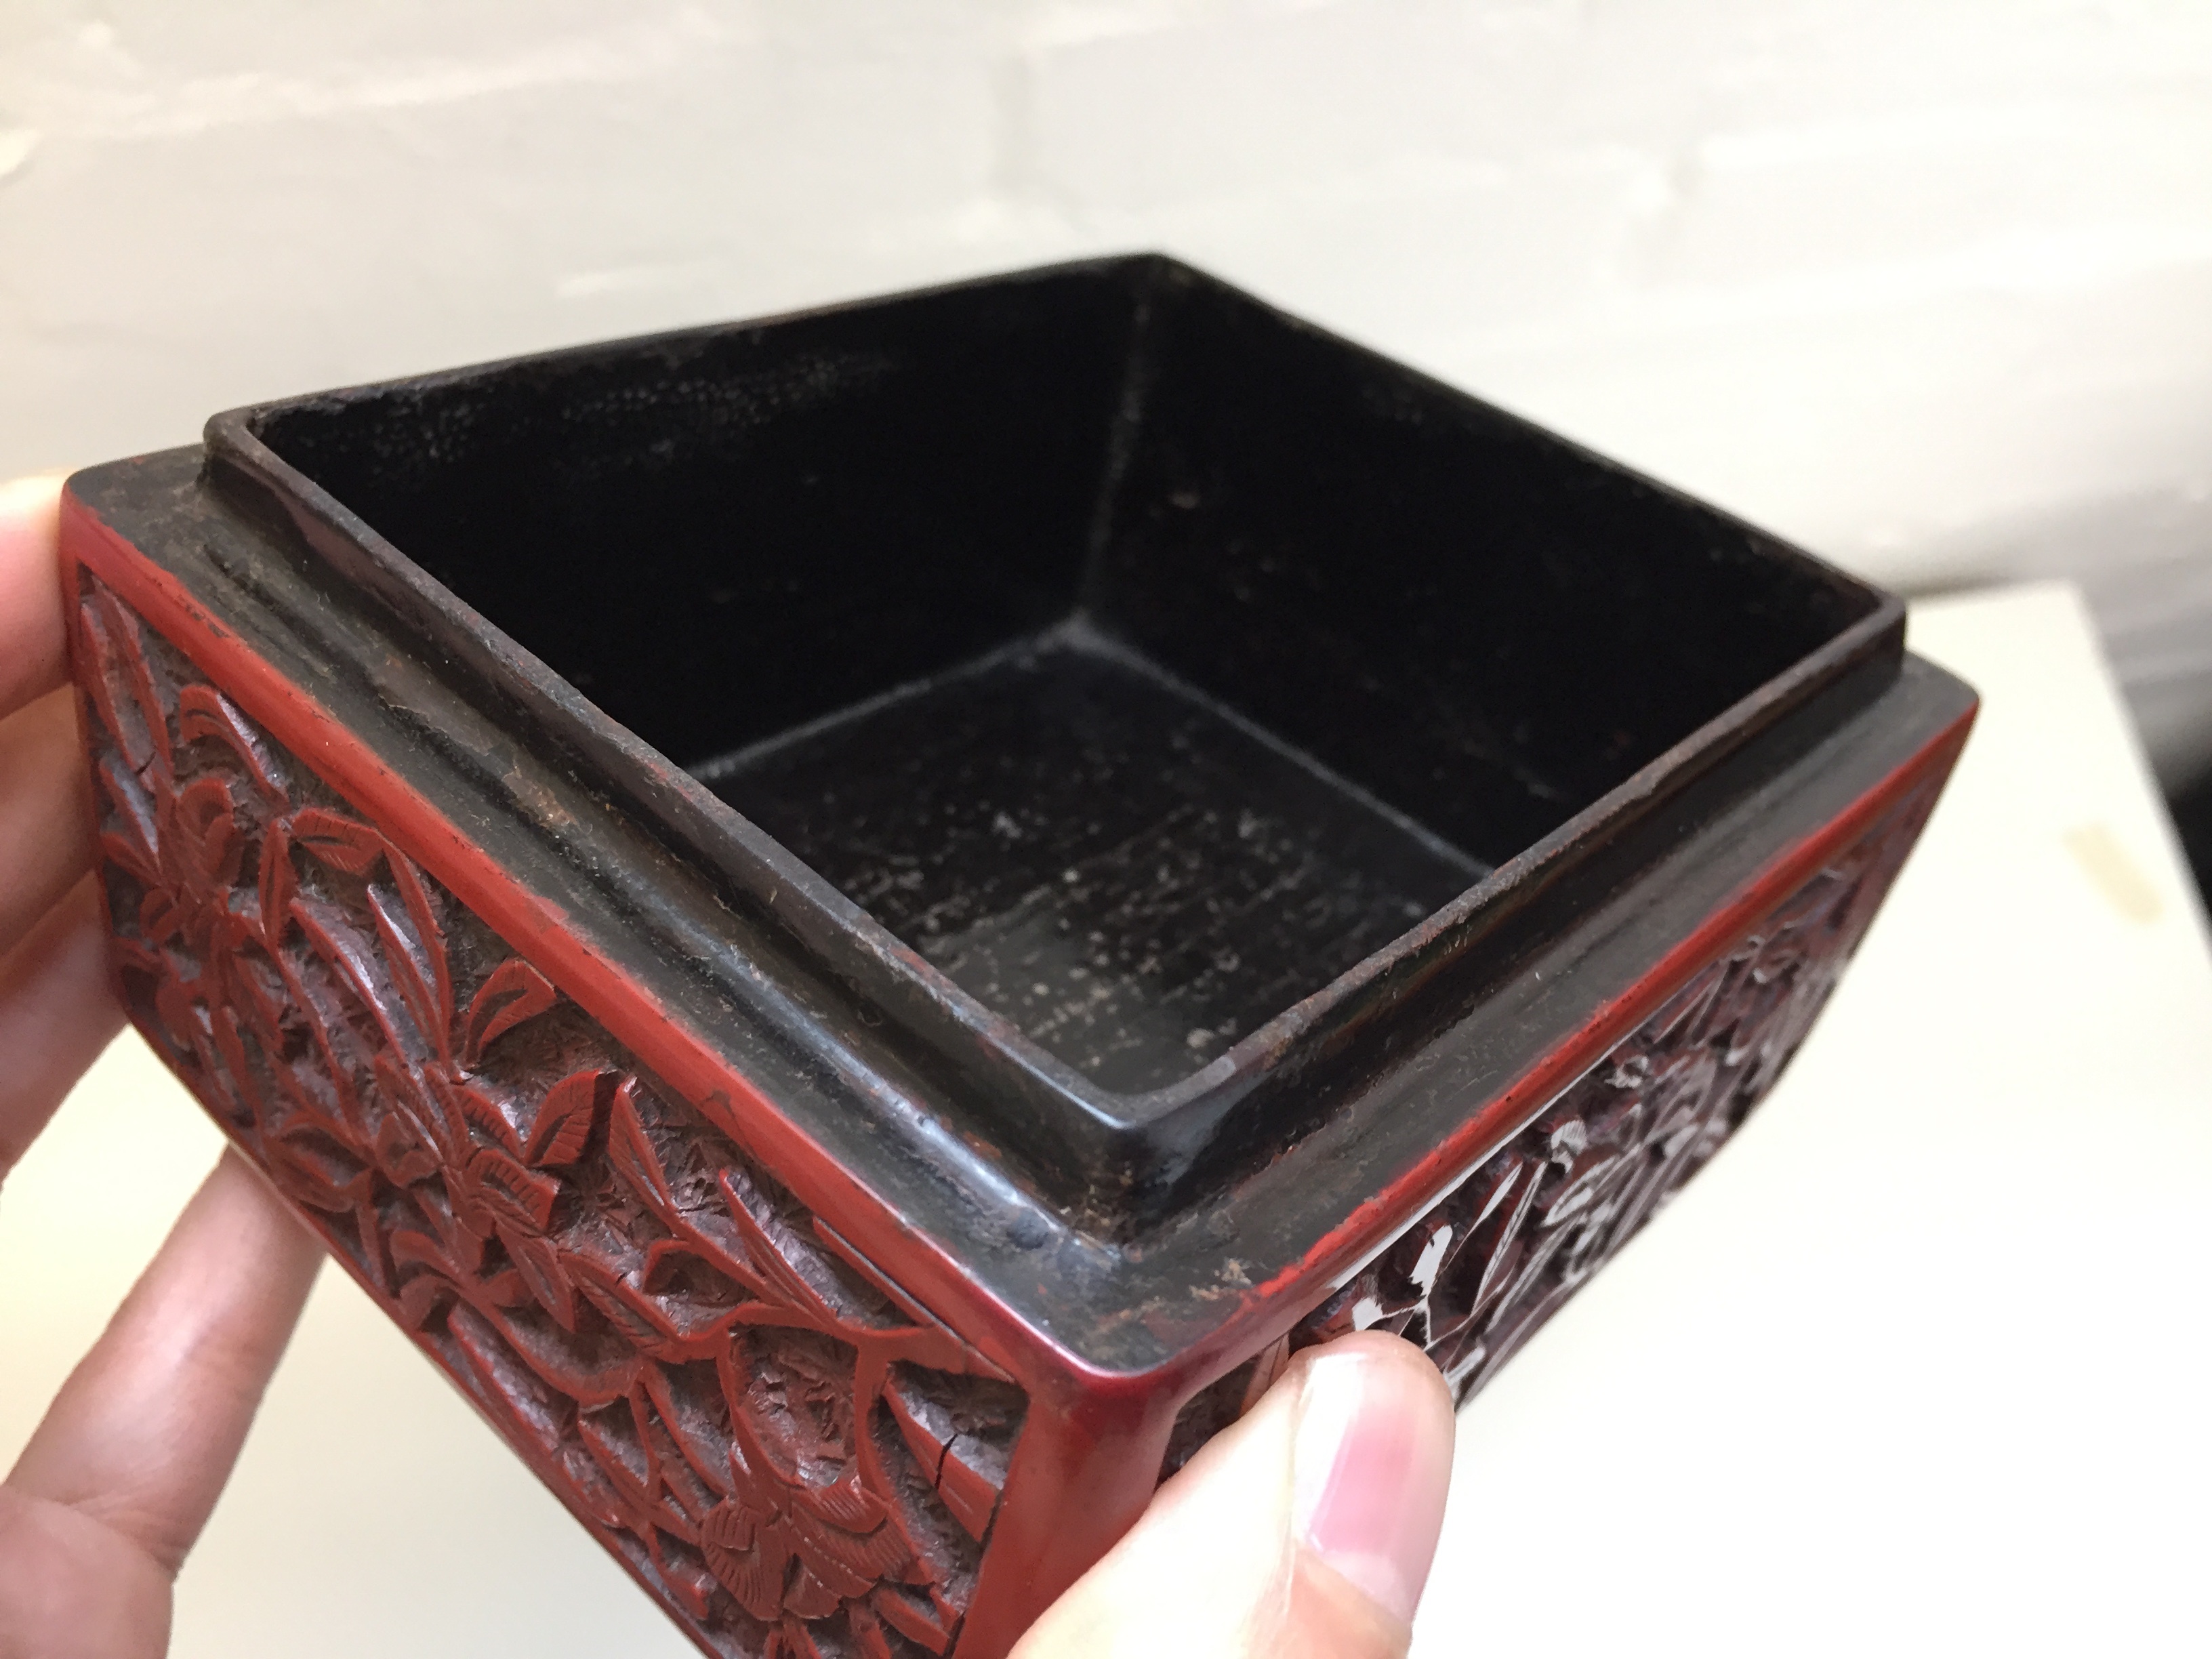 A CHINESE CINNABAR LACQUER 'MUSICIAN' BOX AND COVER 晚明 剔紅圖高士行樂圖紋蓋盒 - Image 13 of 20